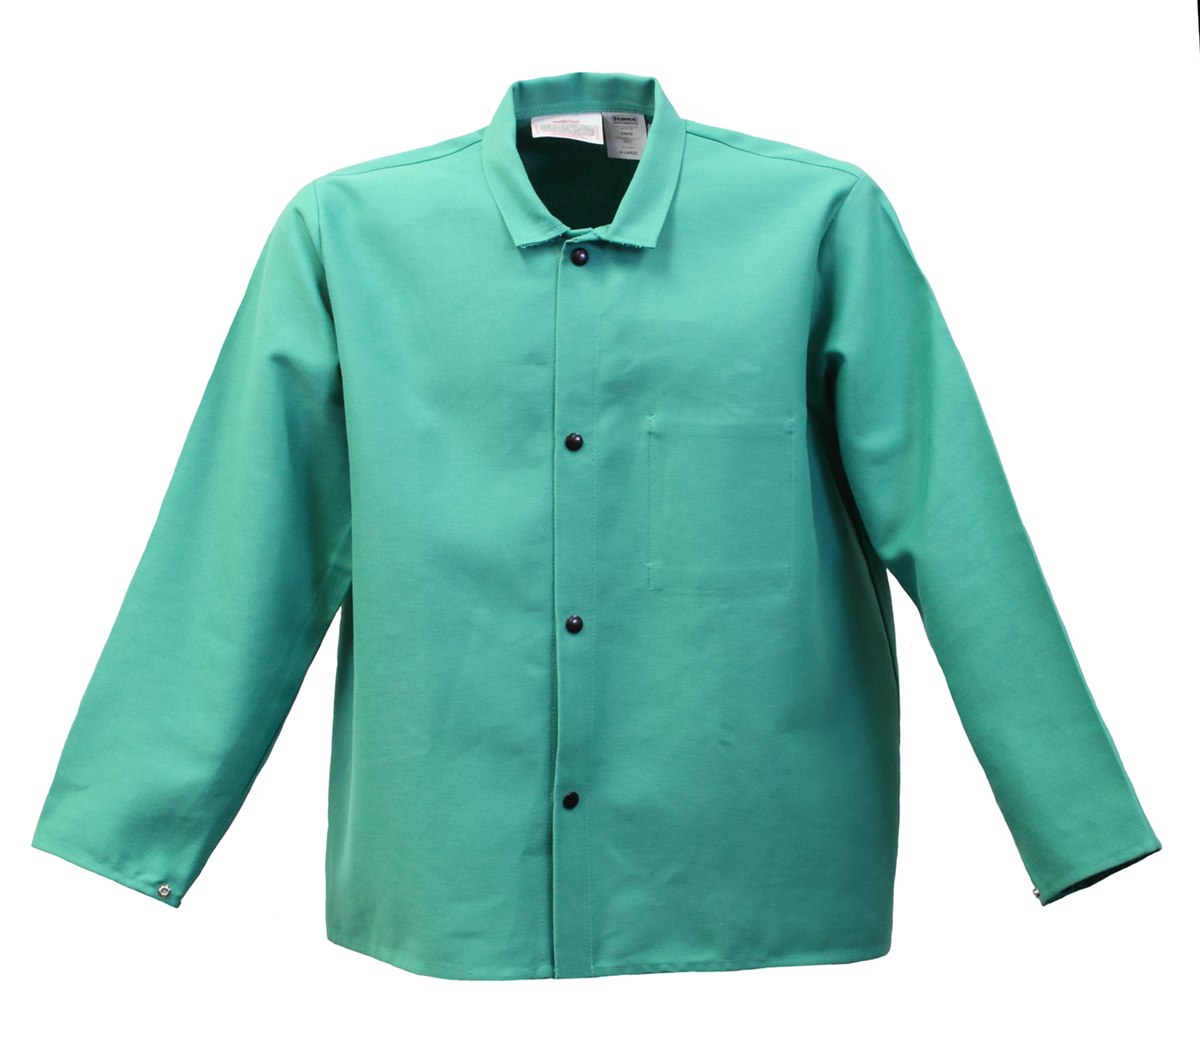 Stanco Safety Products™ Size 3X Green Cotton Flame Resistant Coat With Snap Closure